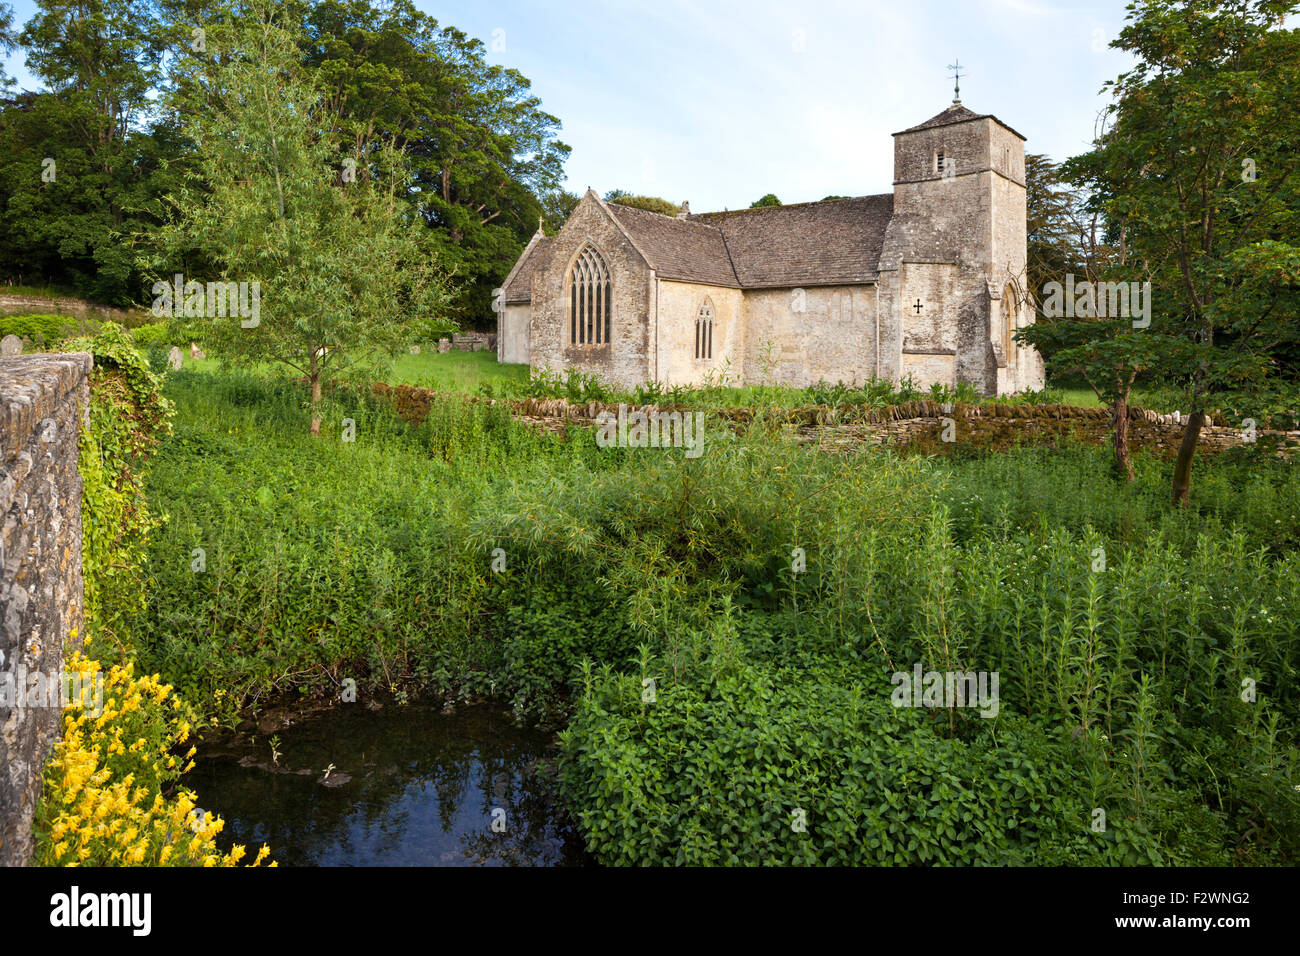 The church of St Michael & St Martin beside the River Leach in the Cotswold village of Eastleach Martin, Gloucestershire UK Stock Photo